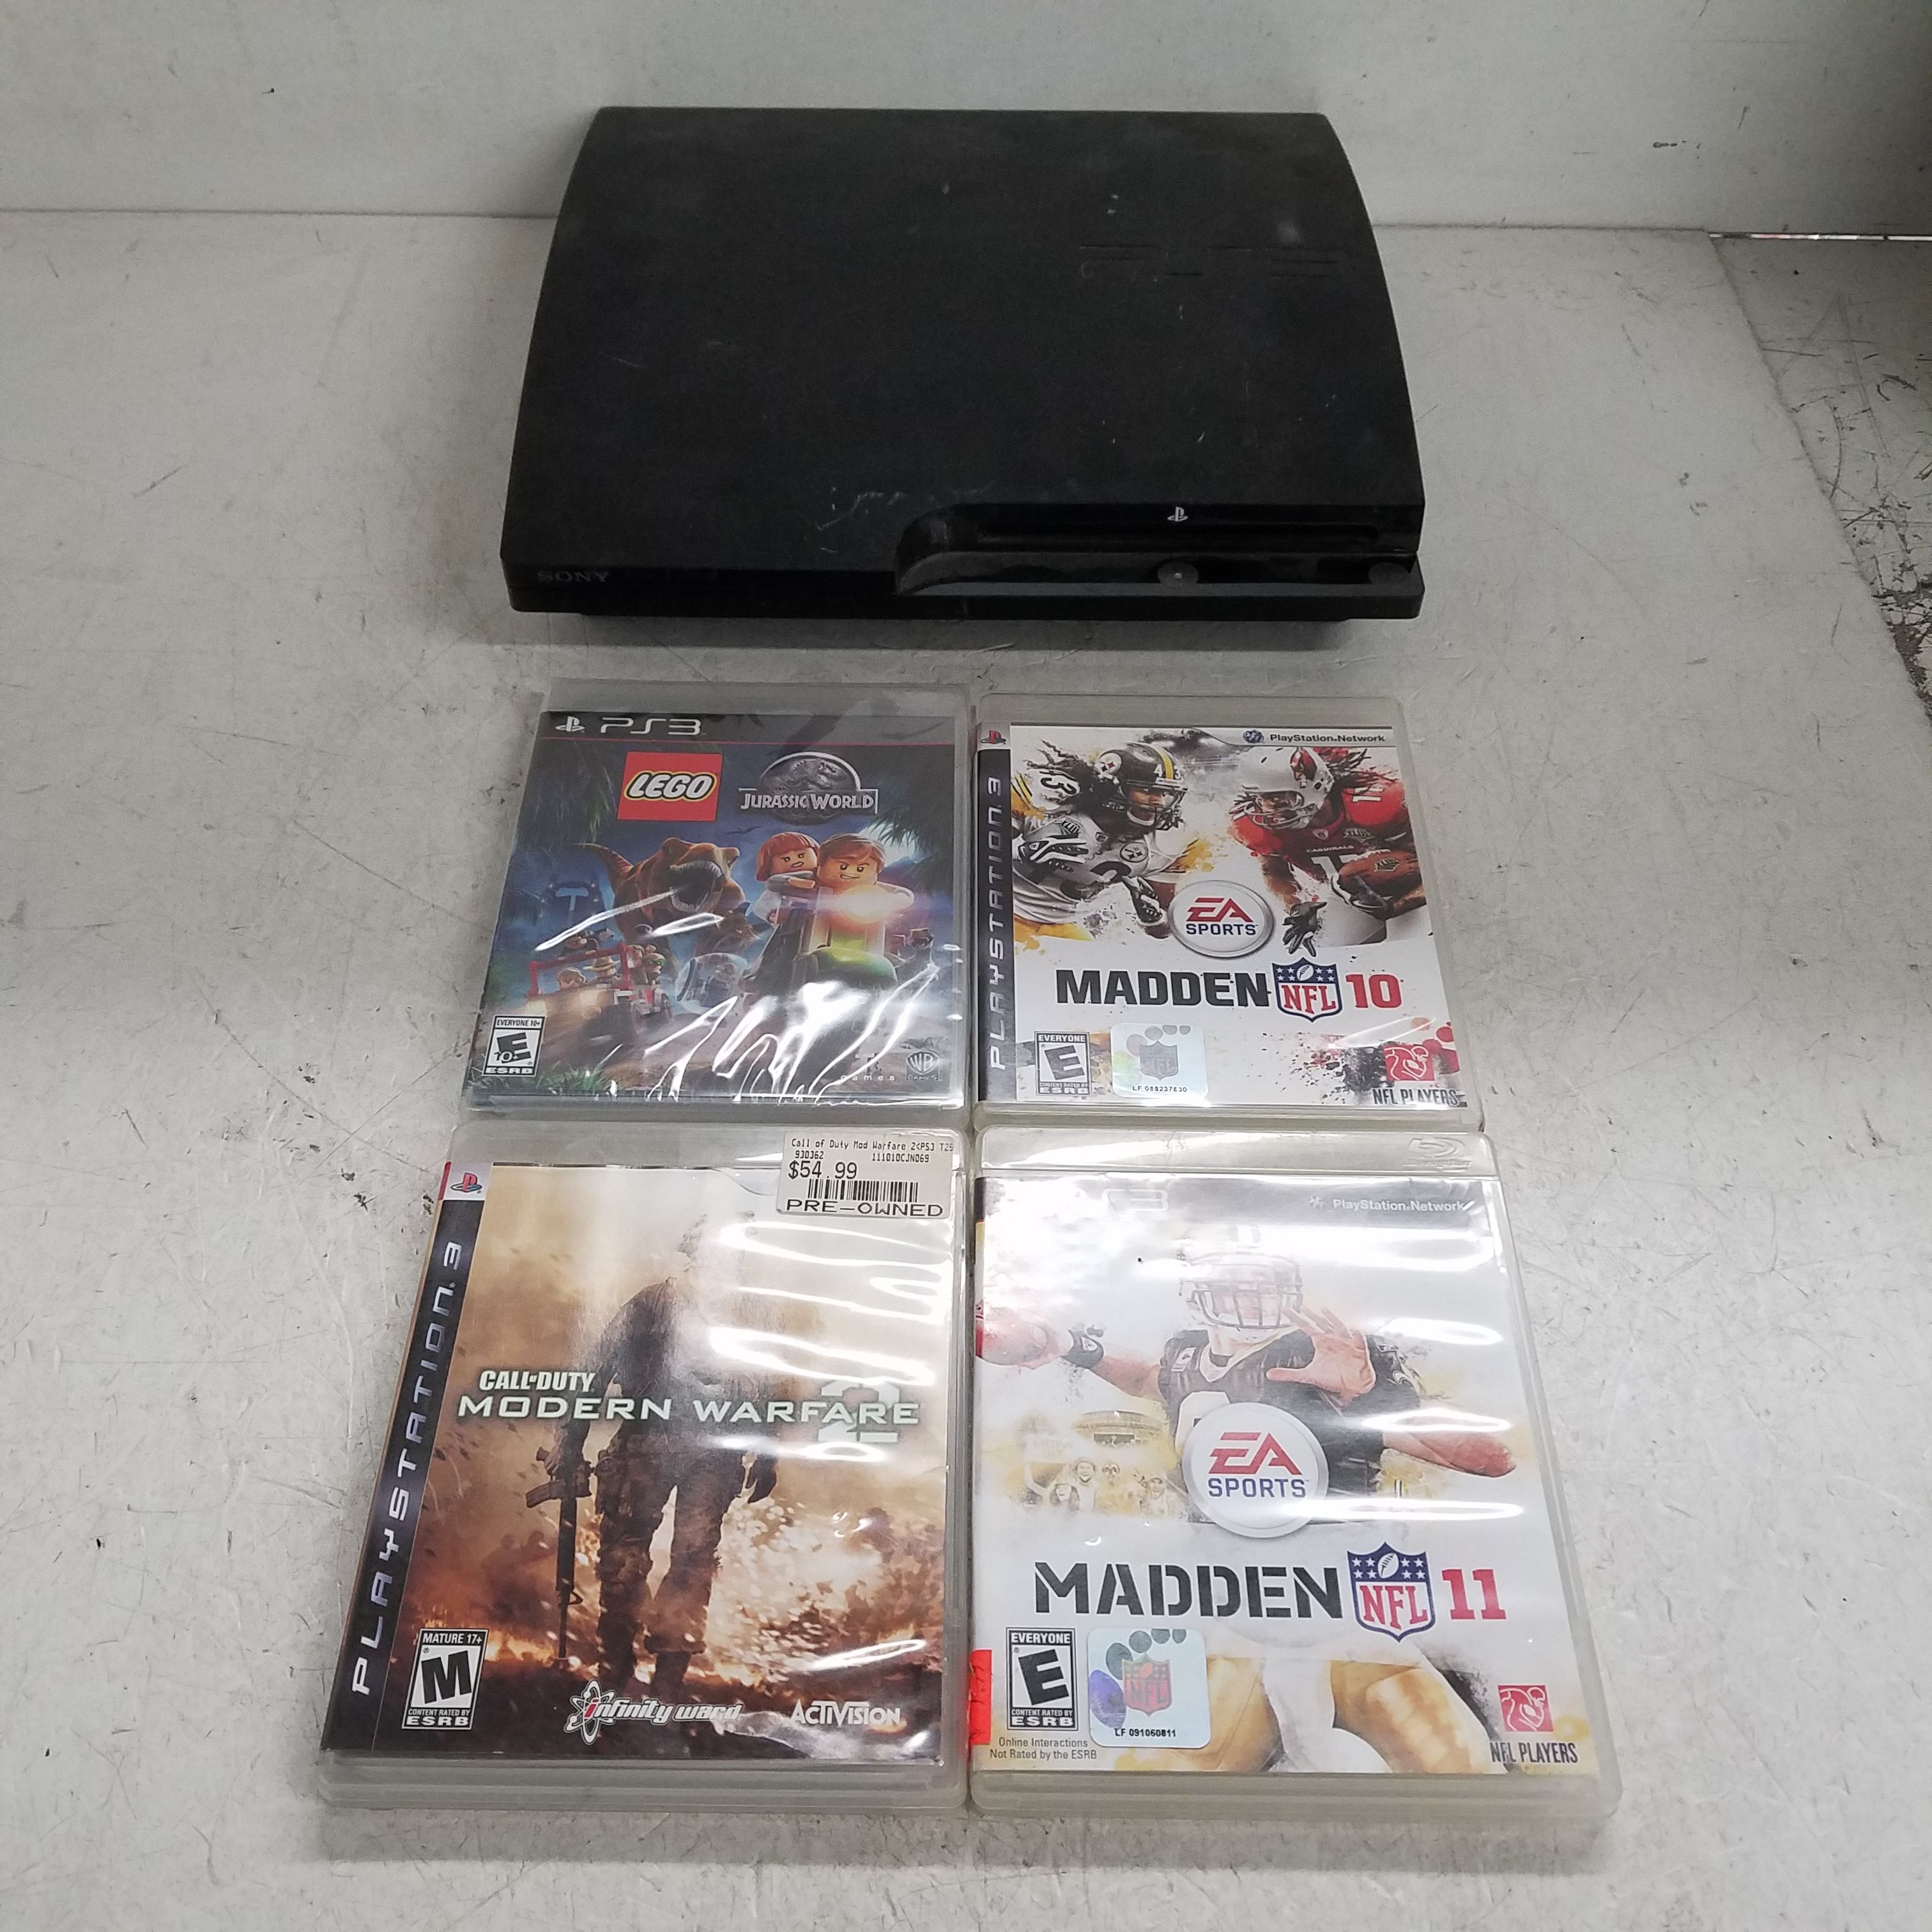 PlayStation 3 - 320 GB System/PlayStation Bundle (Used/Pre-Owned) 